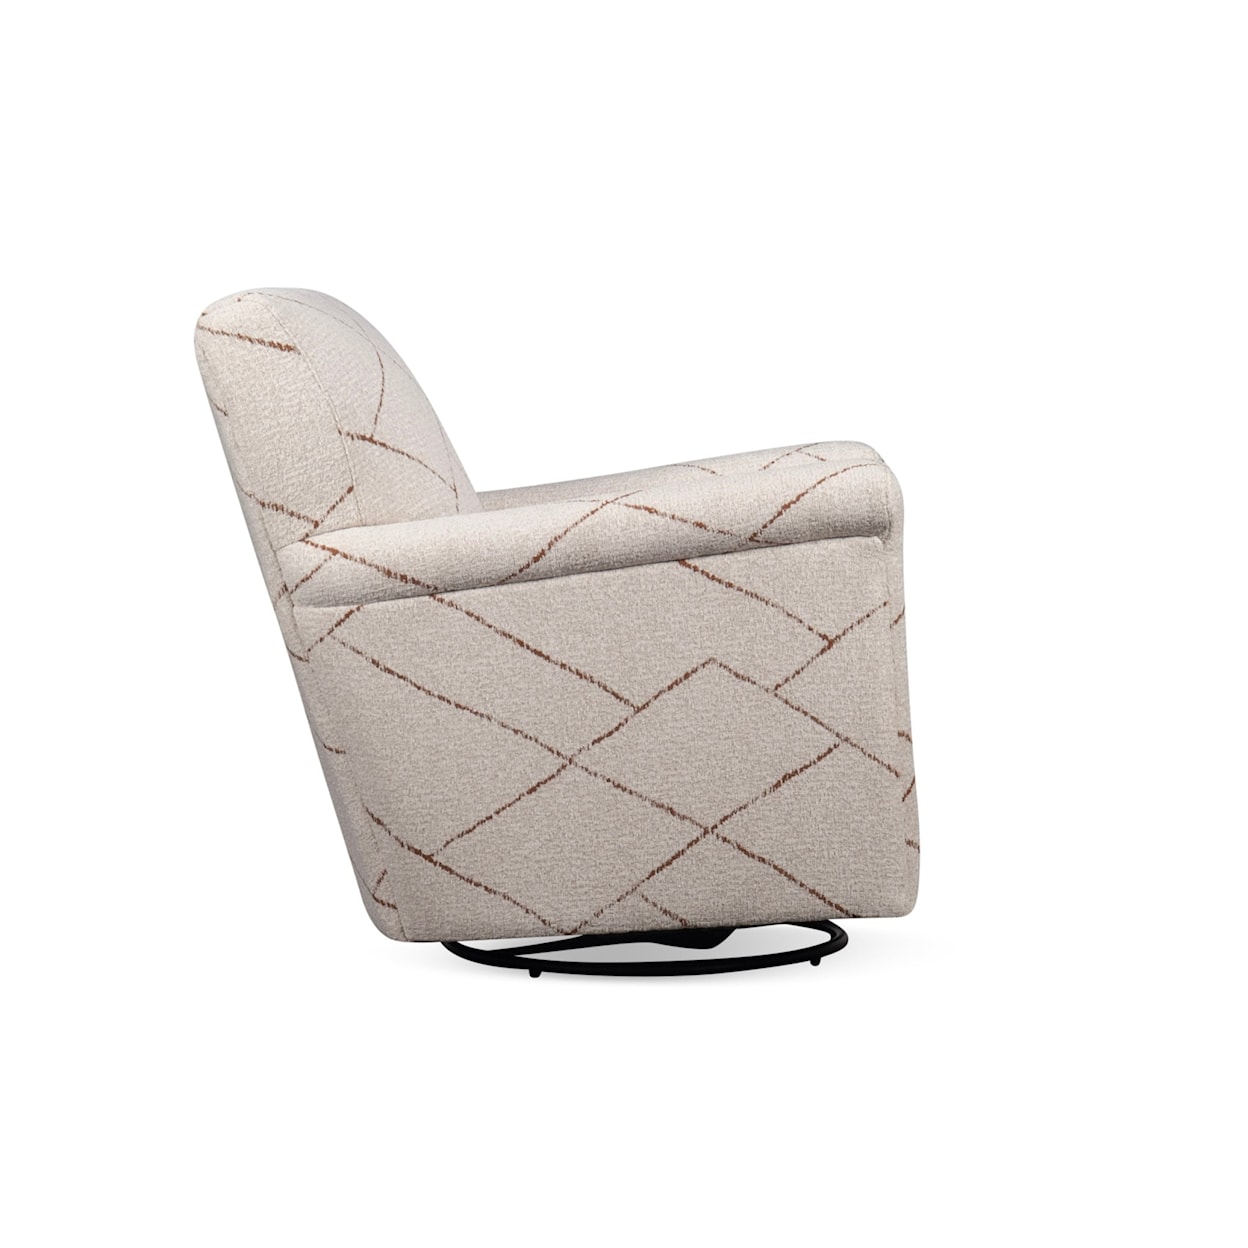 Style Collection by Morris Home Calvin Calvin Swivel Glider